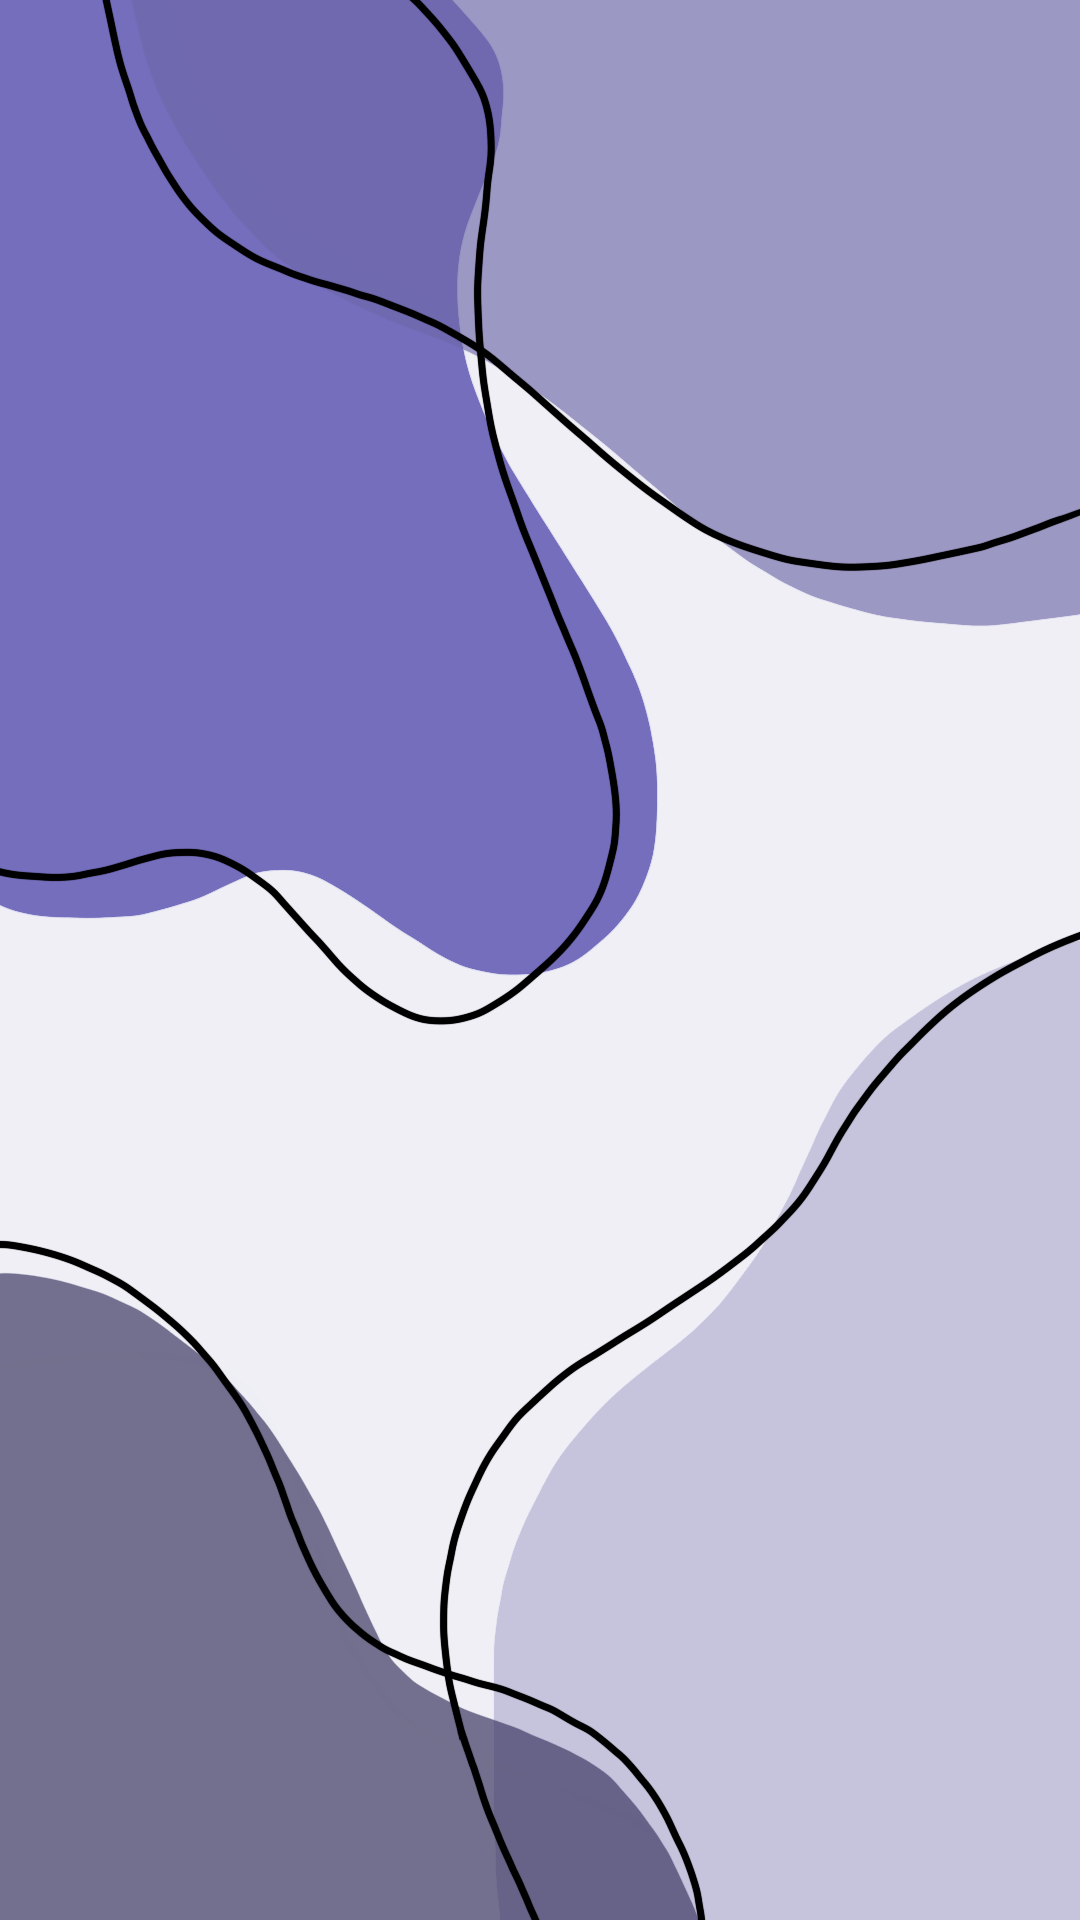 A purple and white abstract background with flowing shapes. - Cow